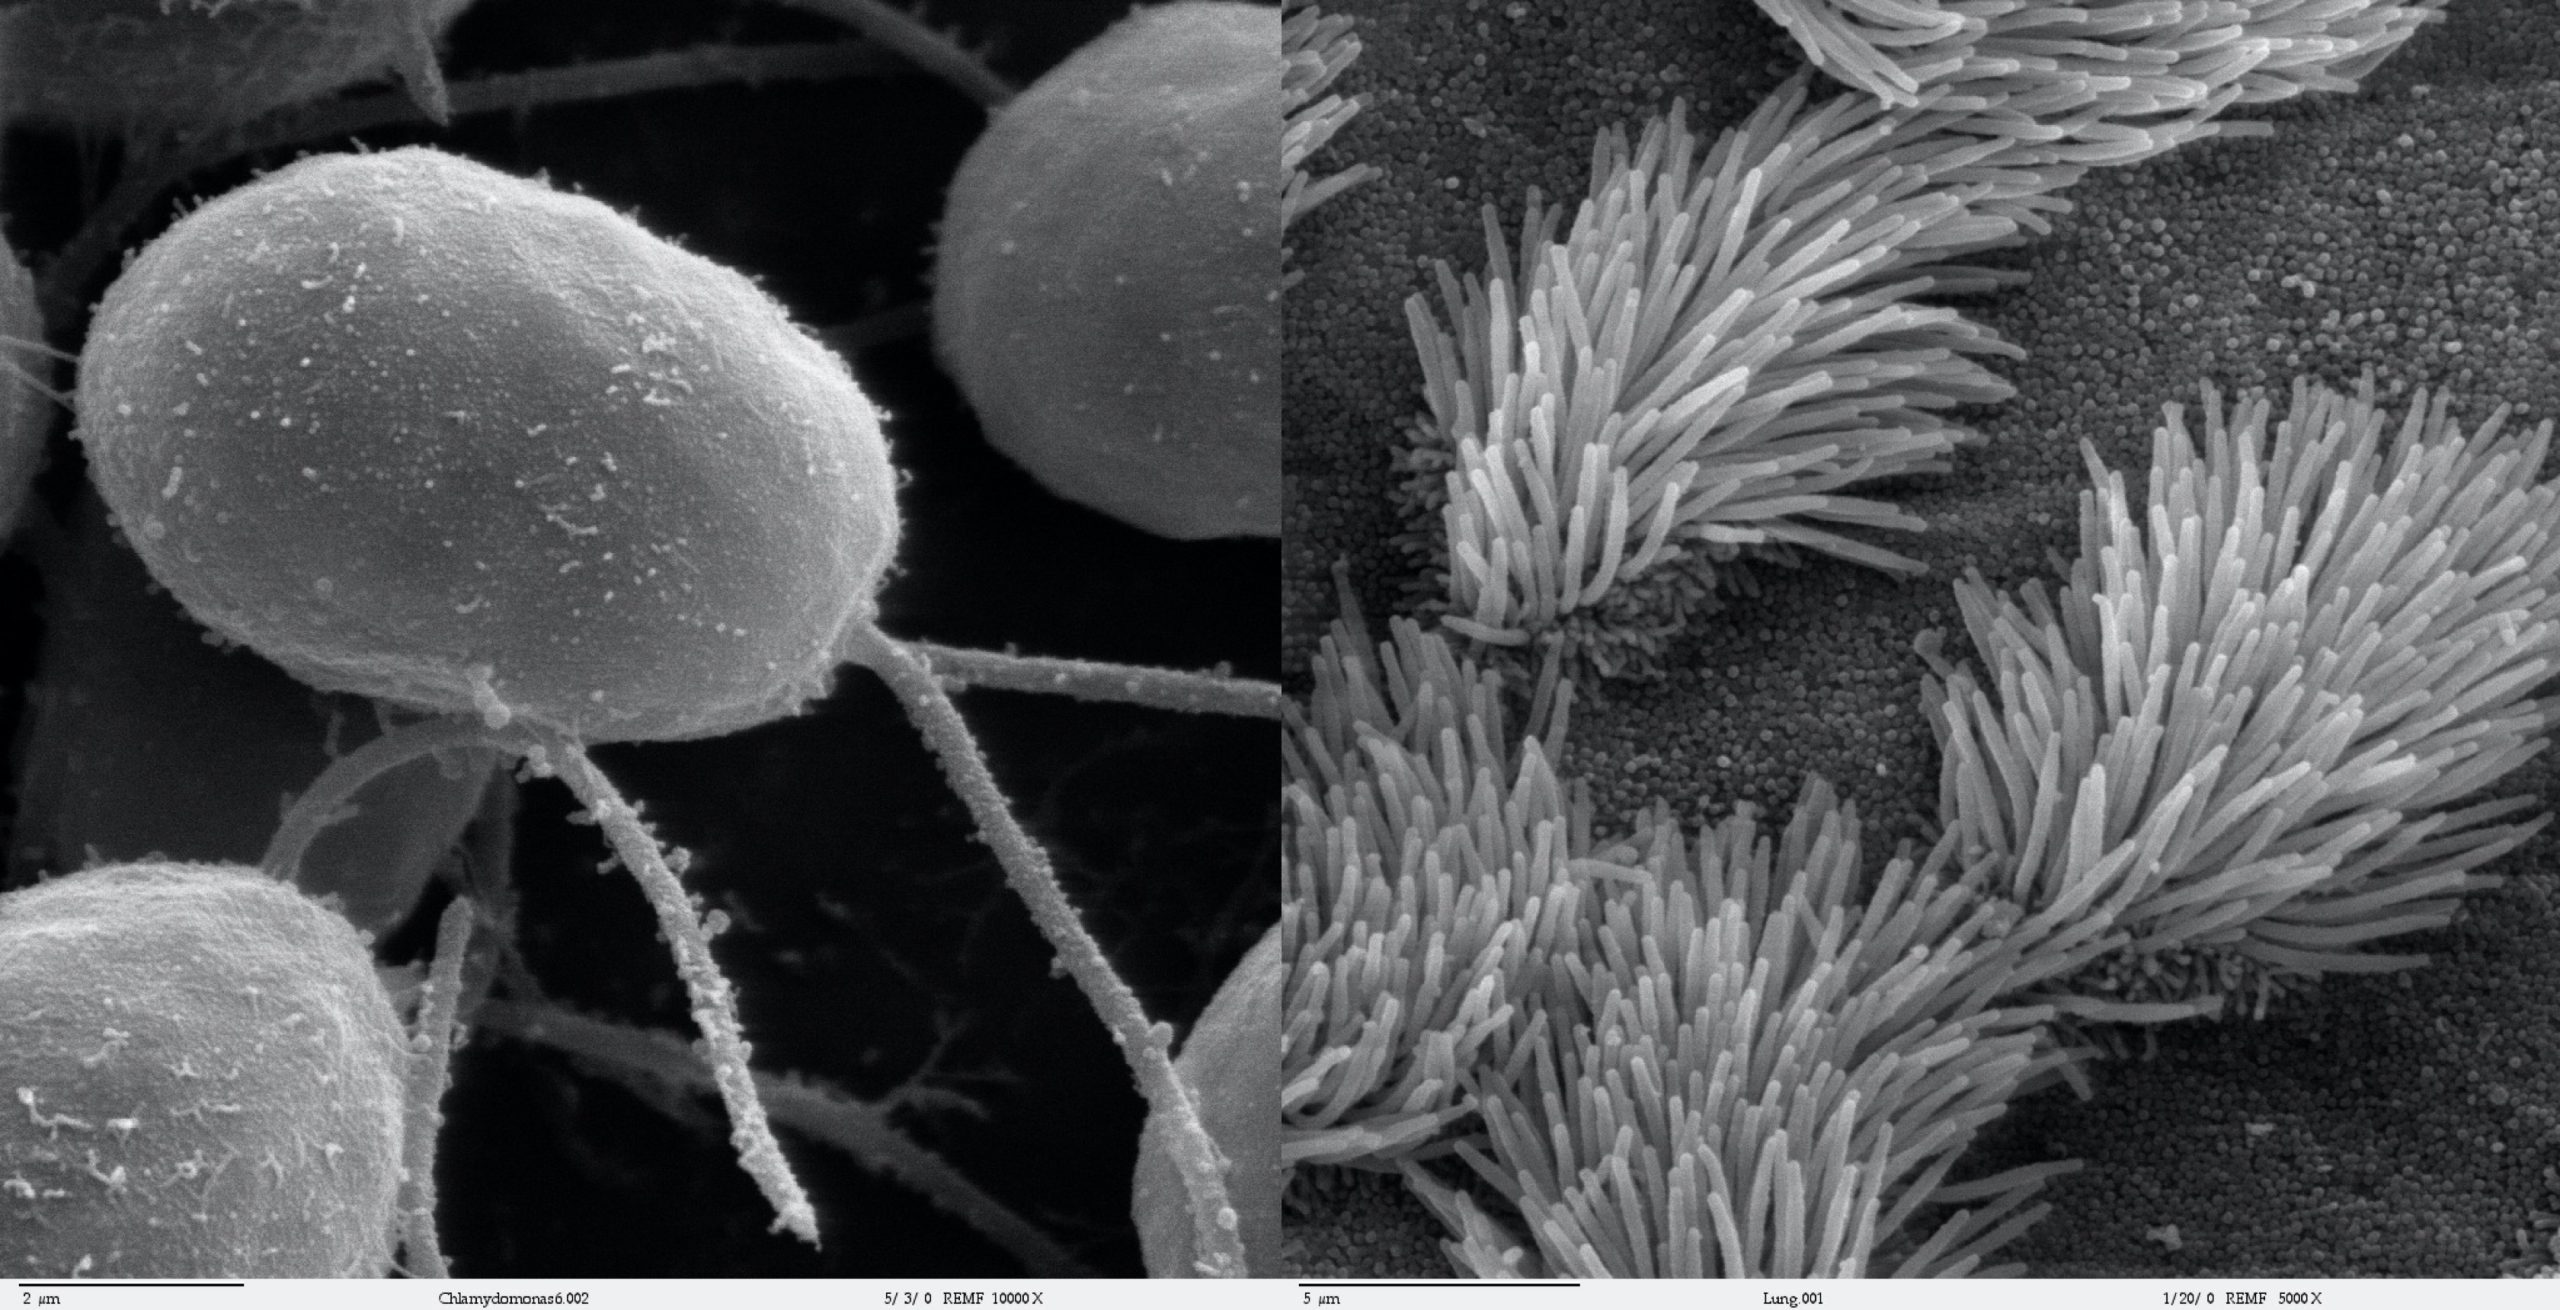 Electron micrographs showing two long flagella on a green algal cell on the left, and groups of short cilia in lung epithelial cells on the right.